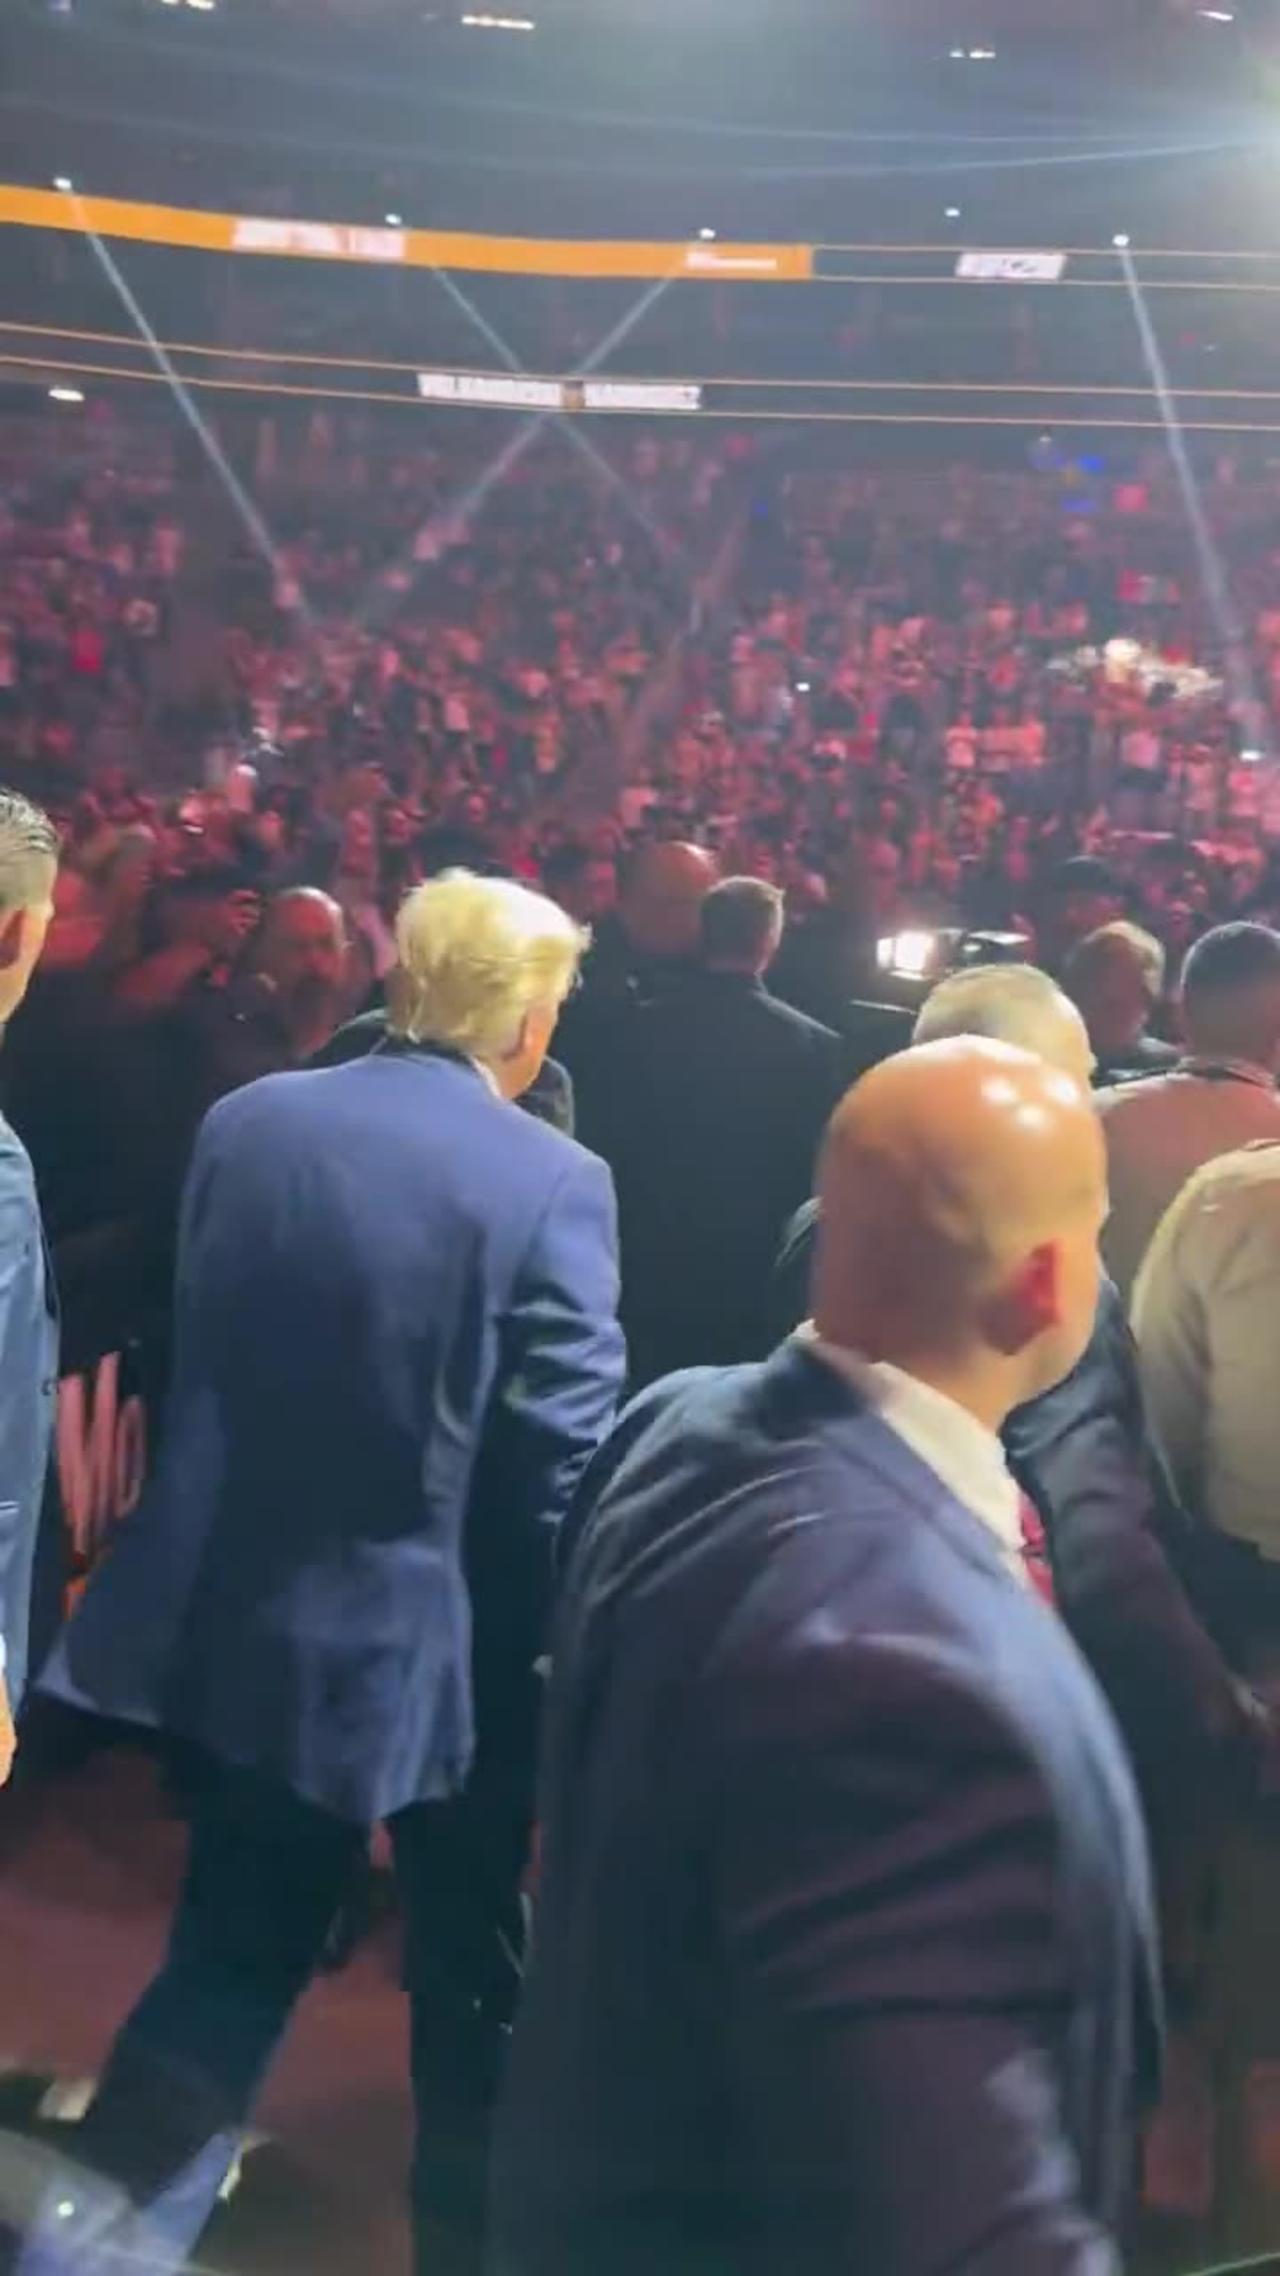 Audience in Las Vegas erupts in excitement as the 45th President enters the UFC 290 venue.